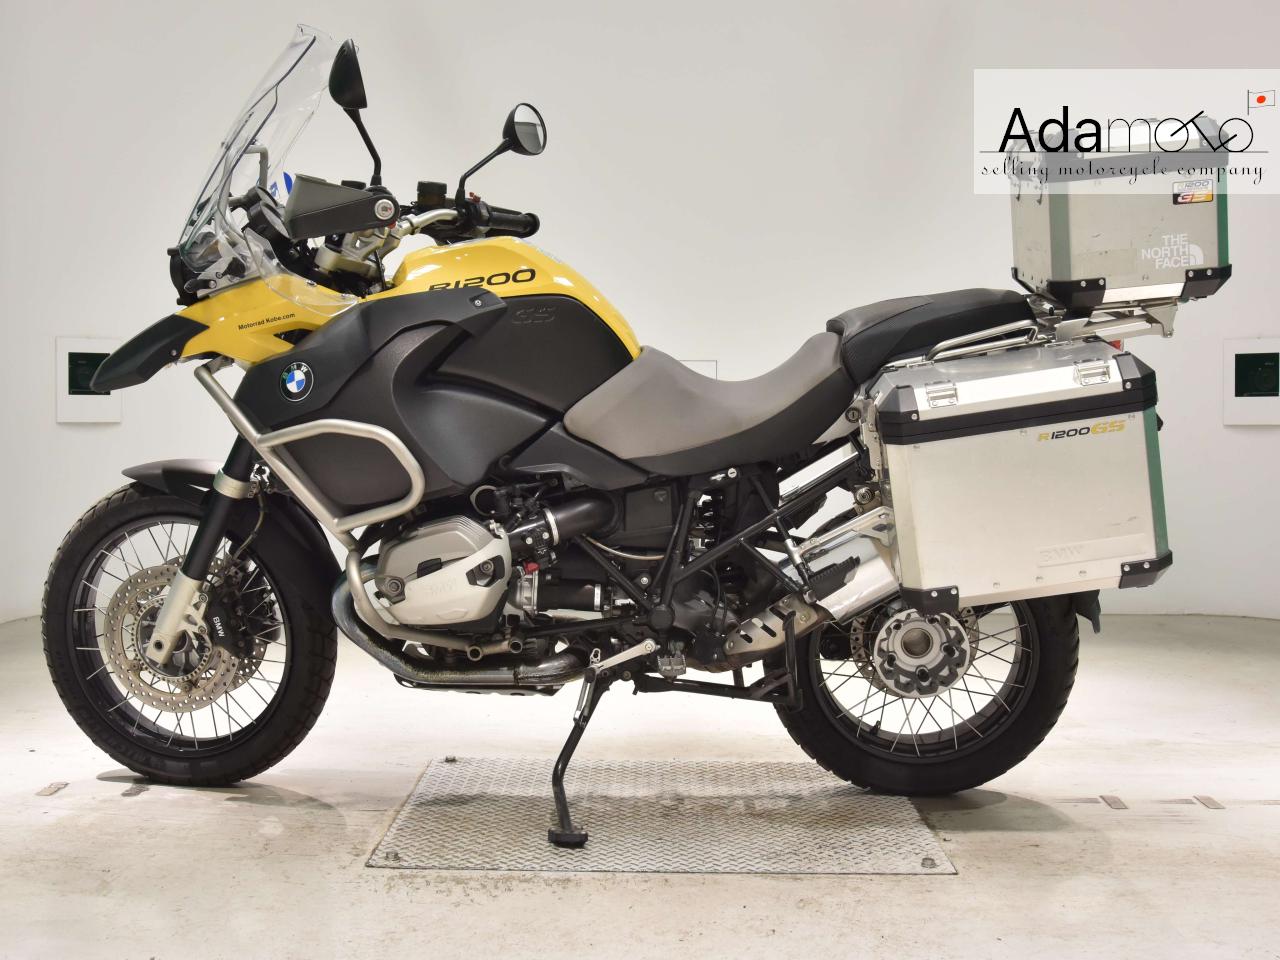 BMW R1200GS - Adamoto - Motorcycles from Japan